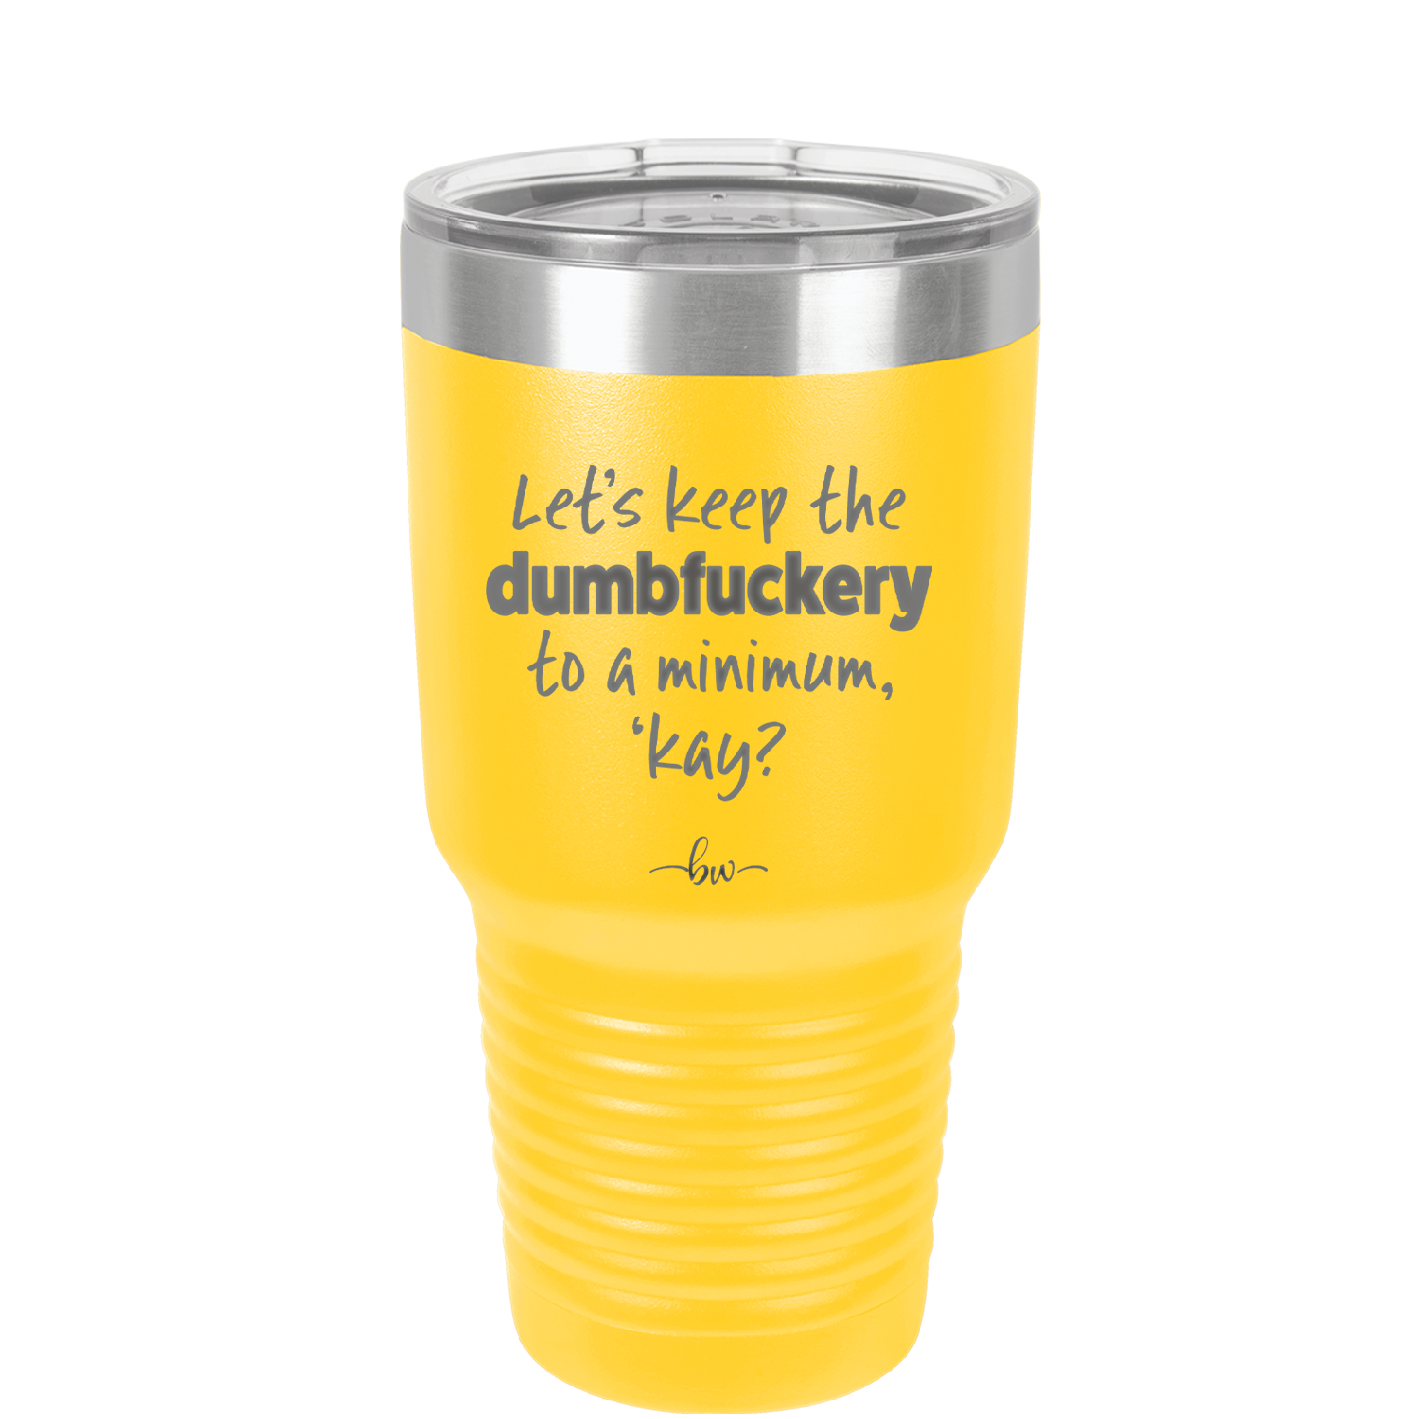 Let's Keep the Dumbfuckery to a Minimum Kay - Laser Engraved Stainless Steel Drinkware - 1719 -